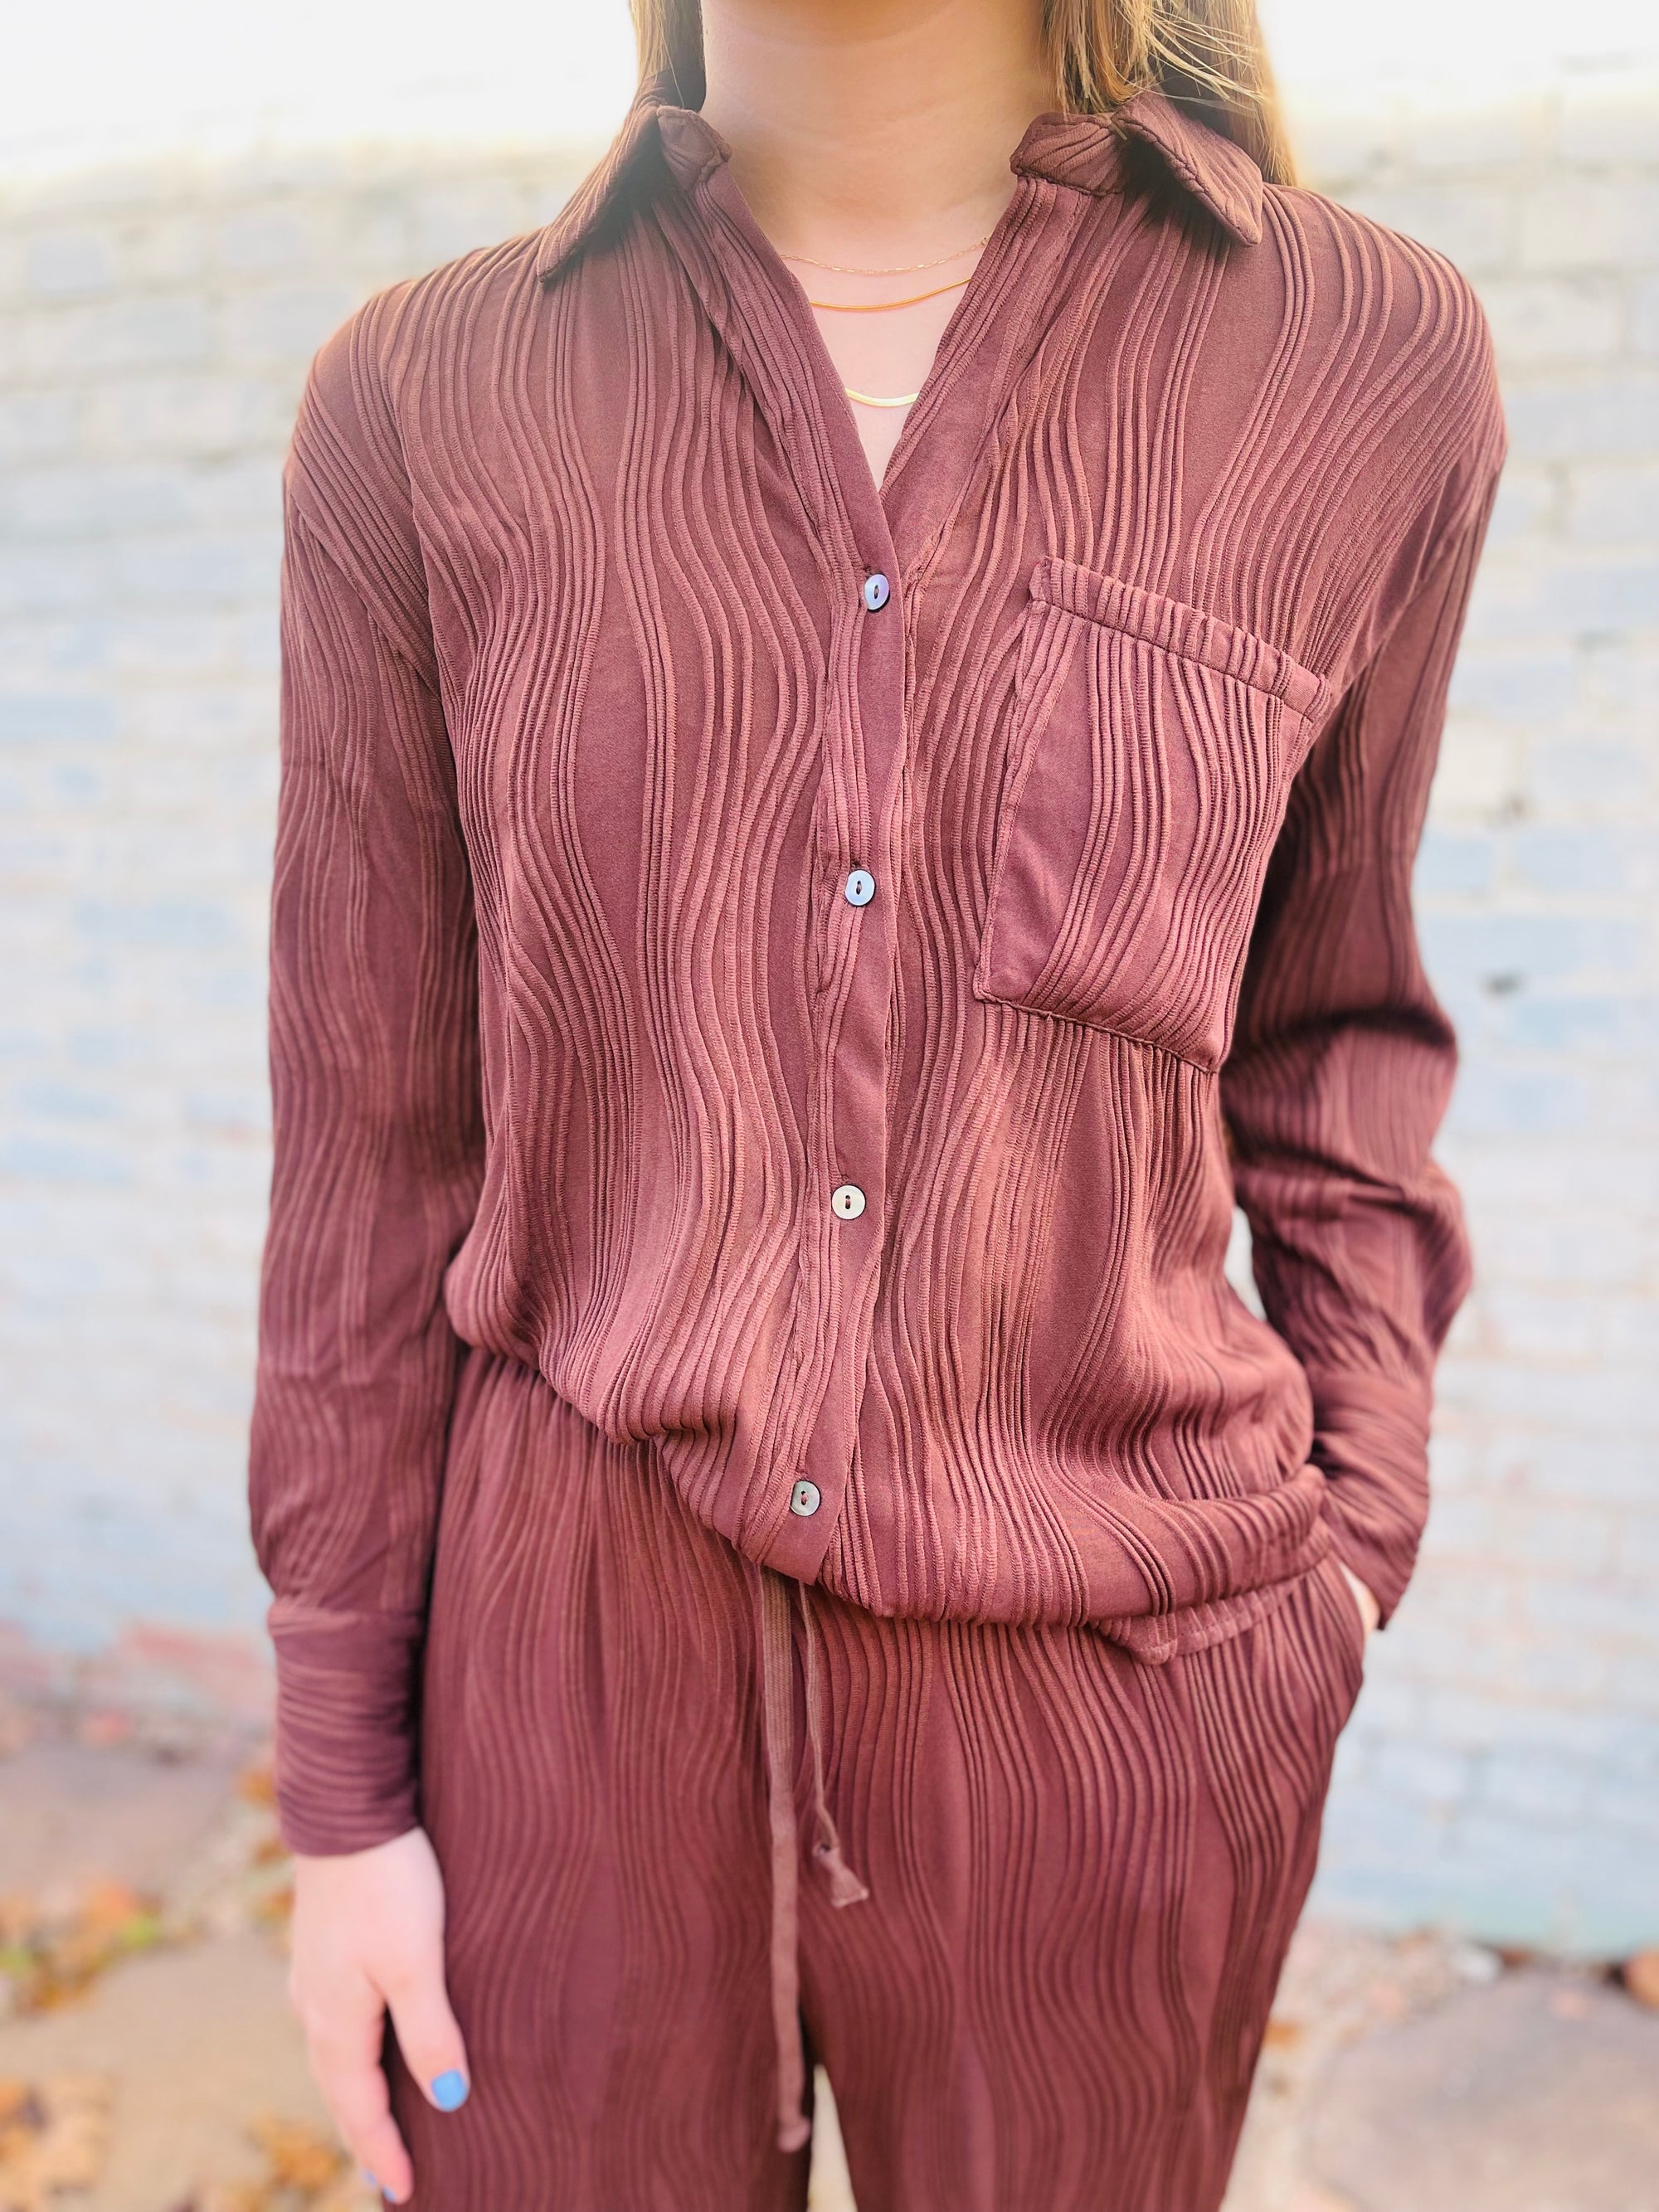 Wavy Textured Chocolate Button Up Top